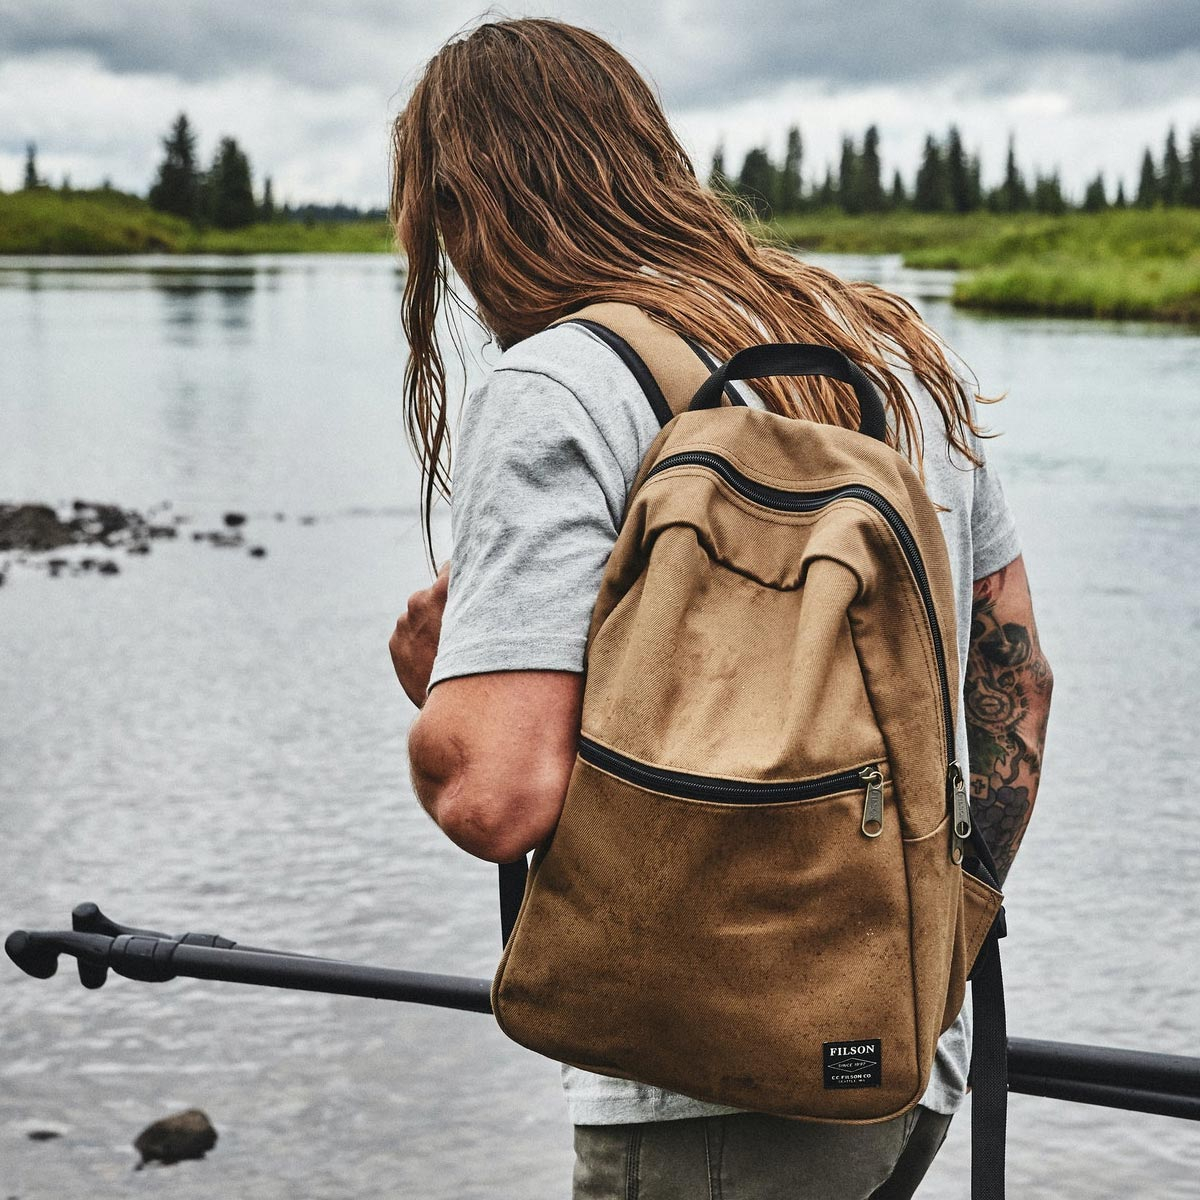 Filson Bandera Backpack 20092142-Sepias, is made with industrial-strength Rugged Twill for years of reliability